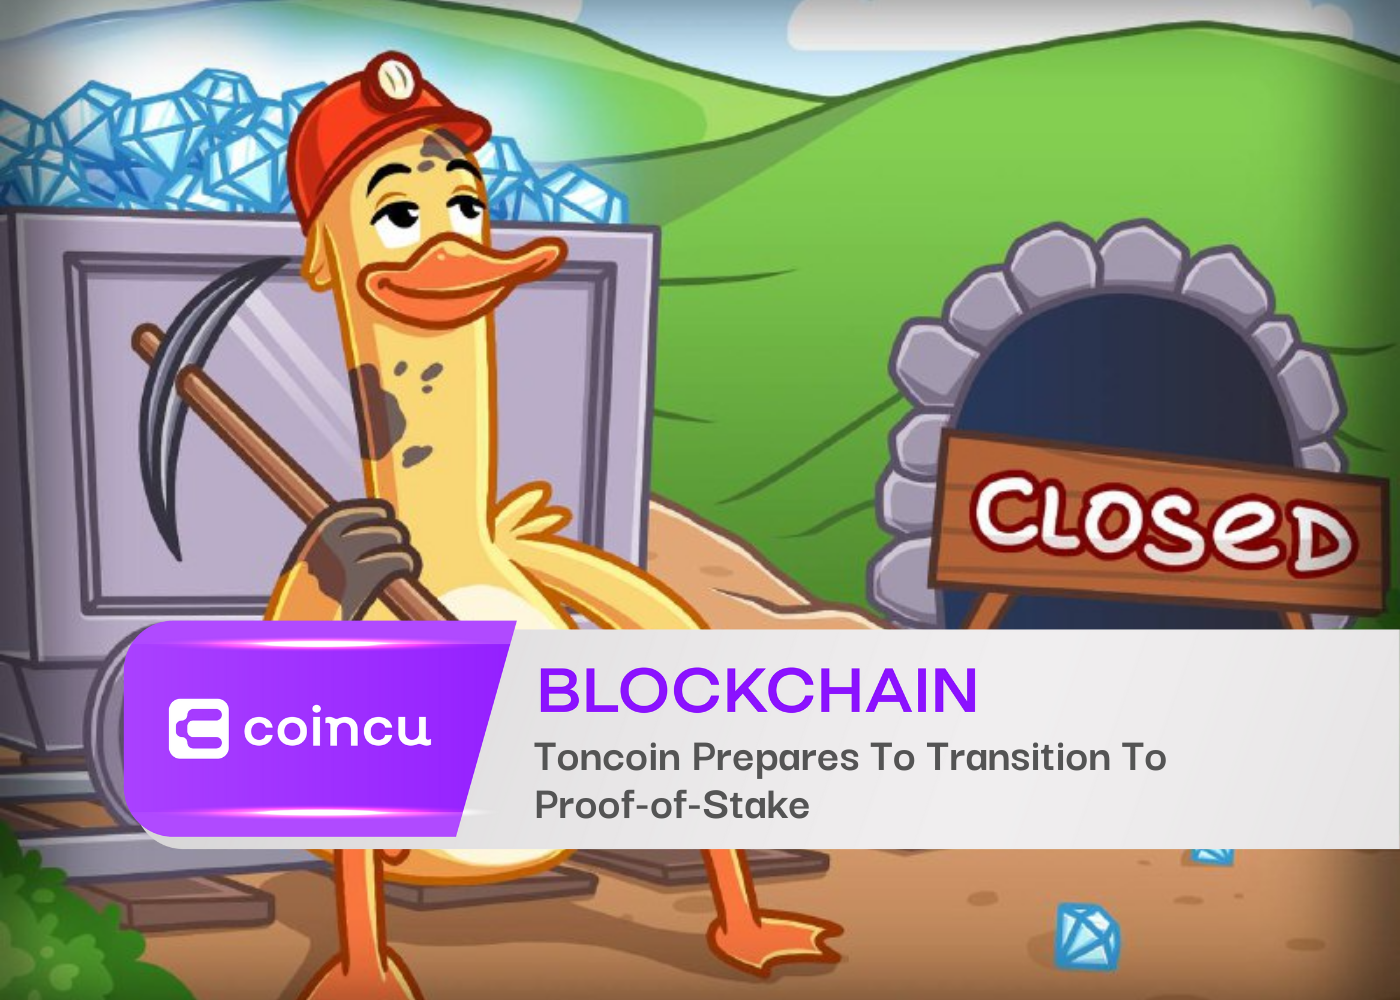 Toncoin Prepares To Transition To Proof-of-Stake